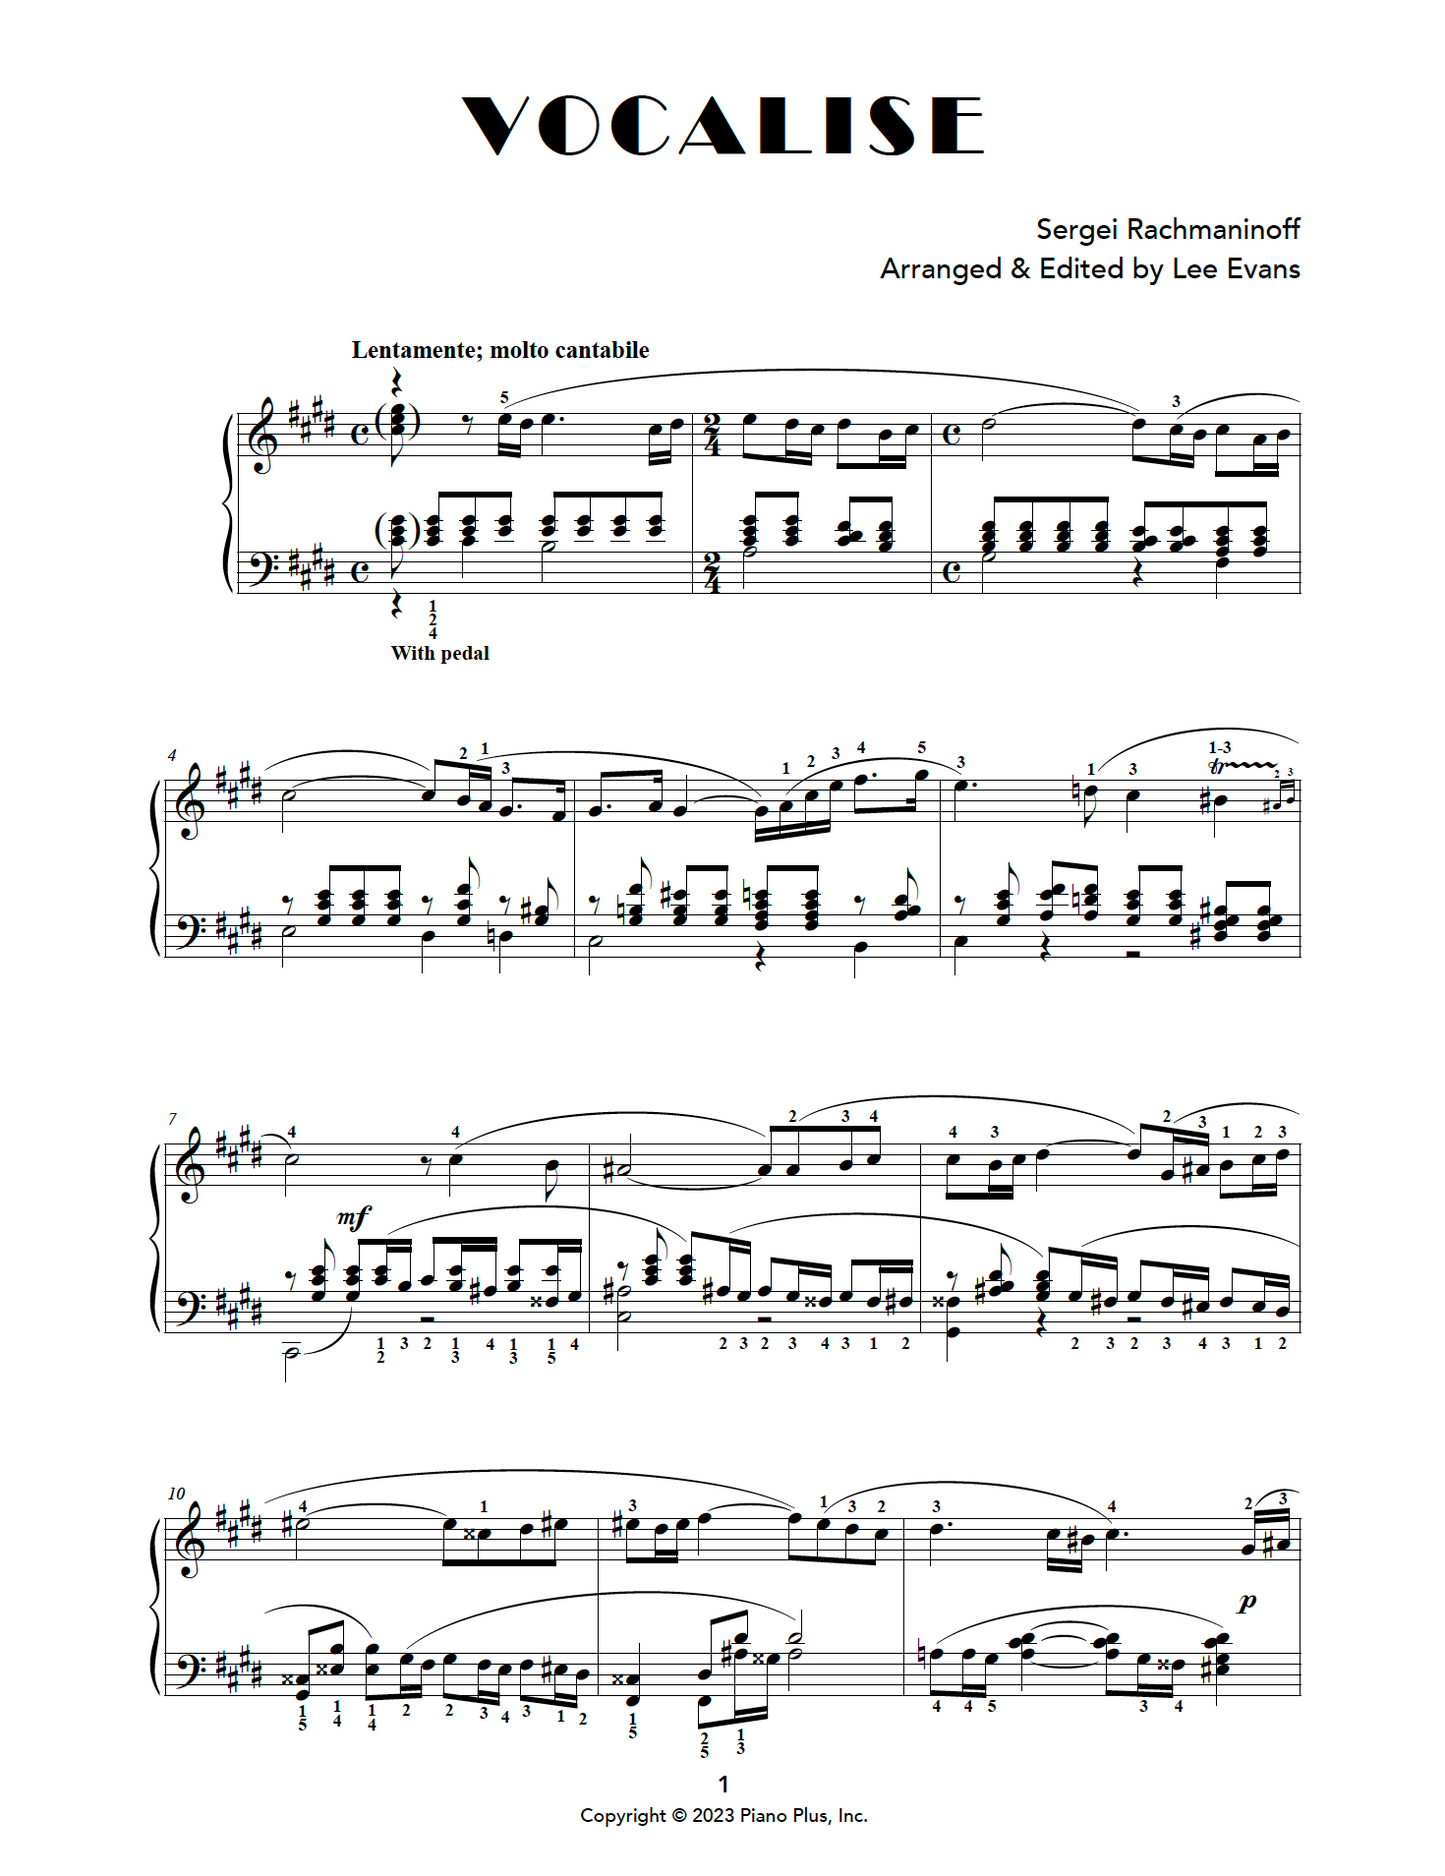 Rachmaninoff: Vocalise Edited and Arranged for Solo Piano